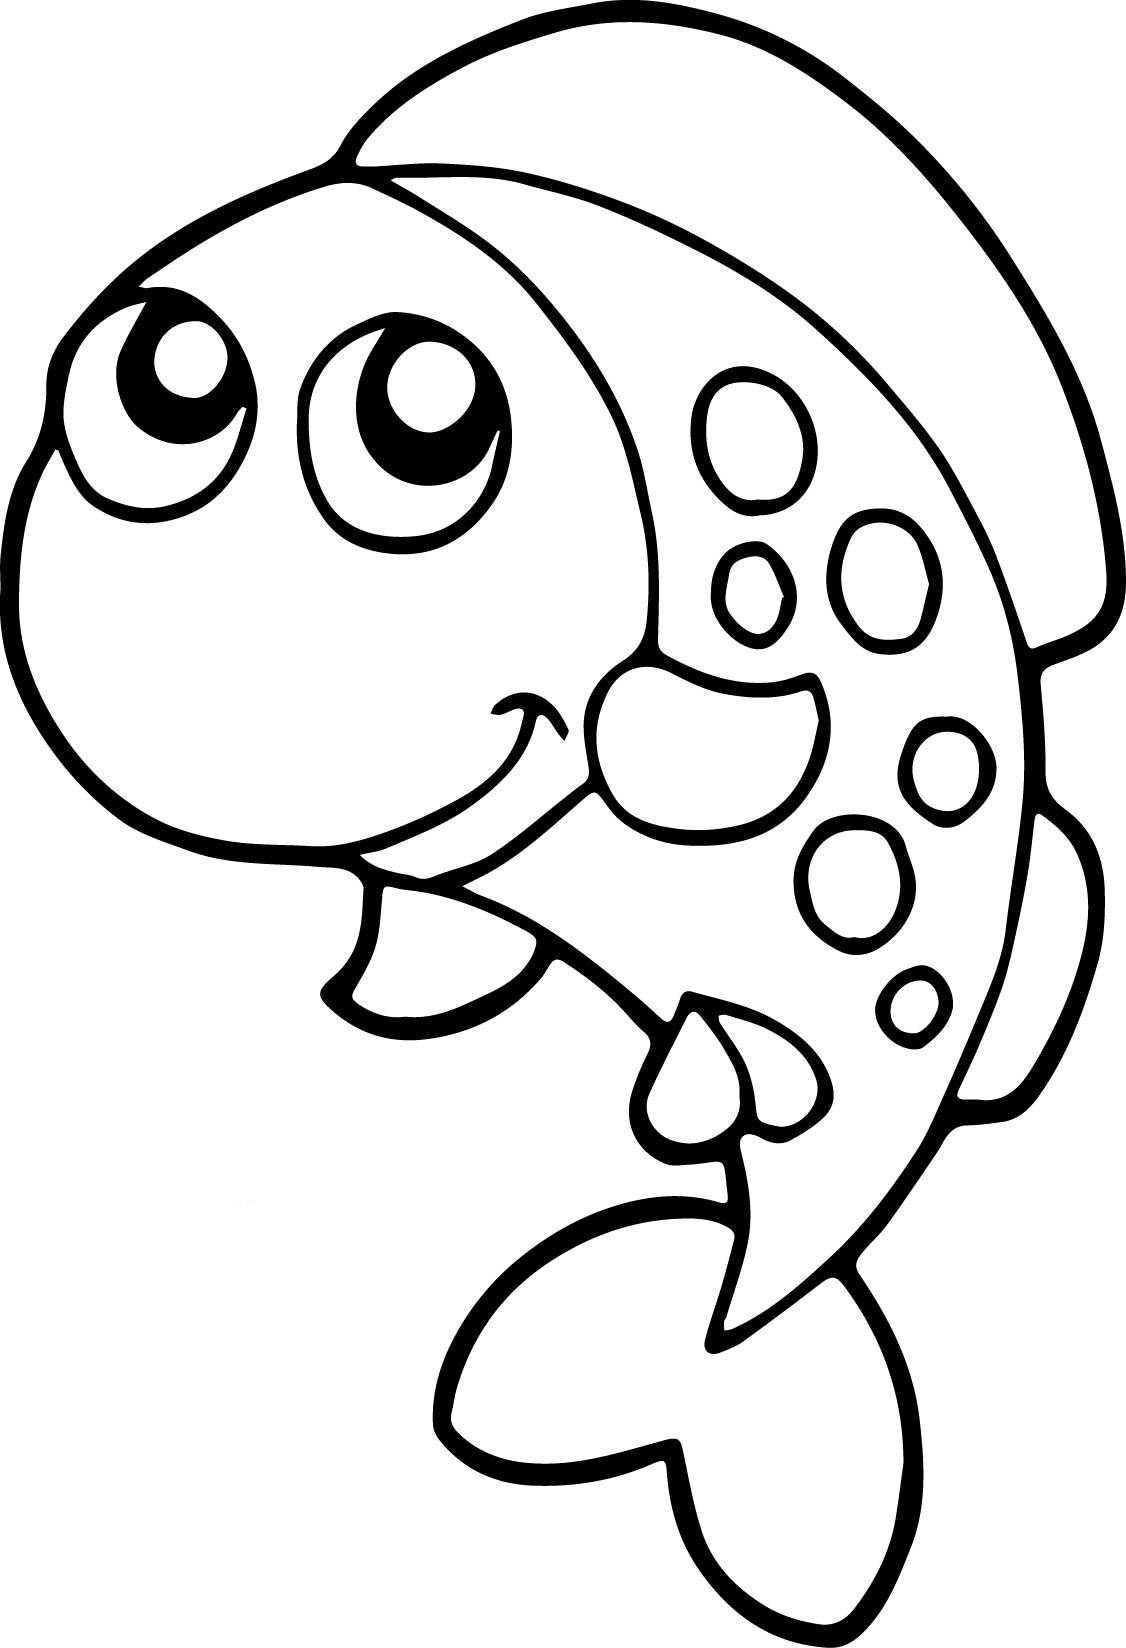 Fish Coloring Pages For Kids Preschool And Kindergarten